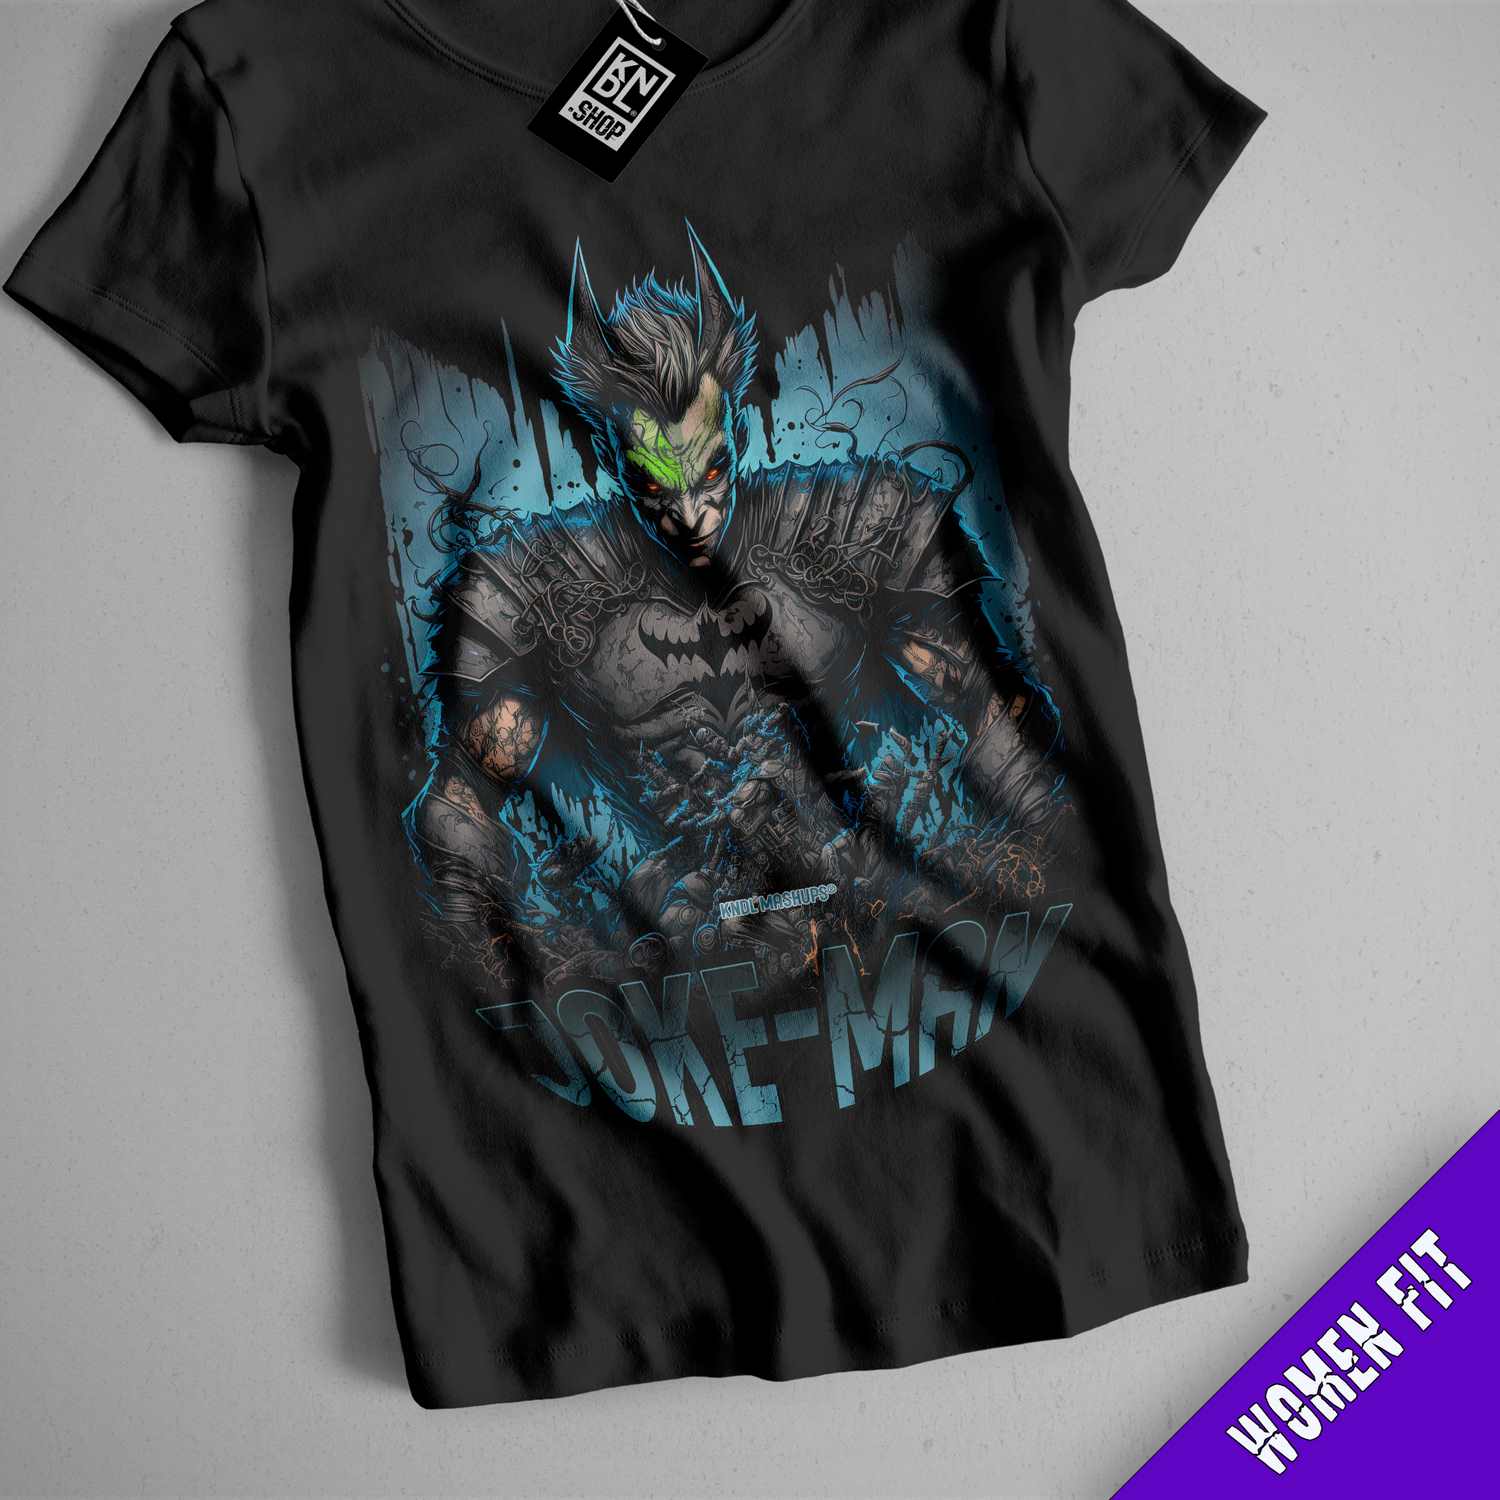 a t - shirt with a batman character on it